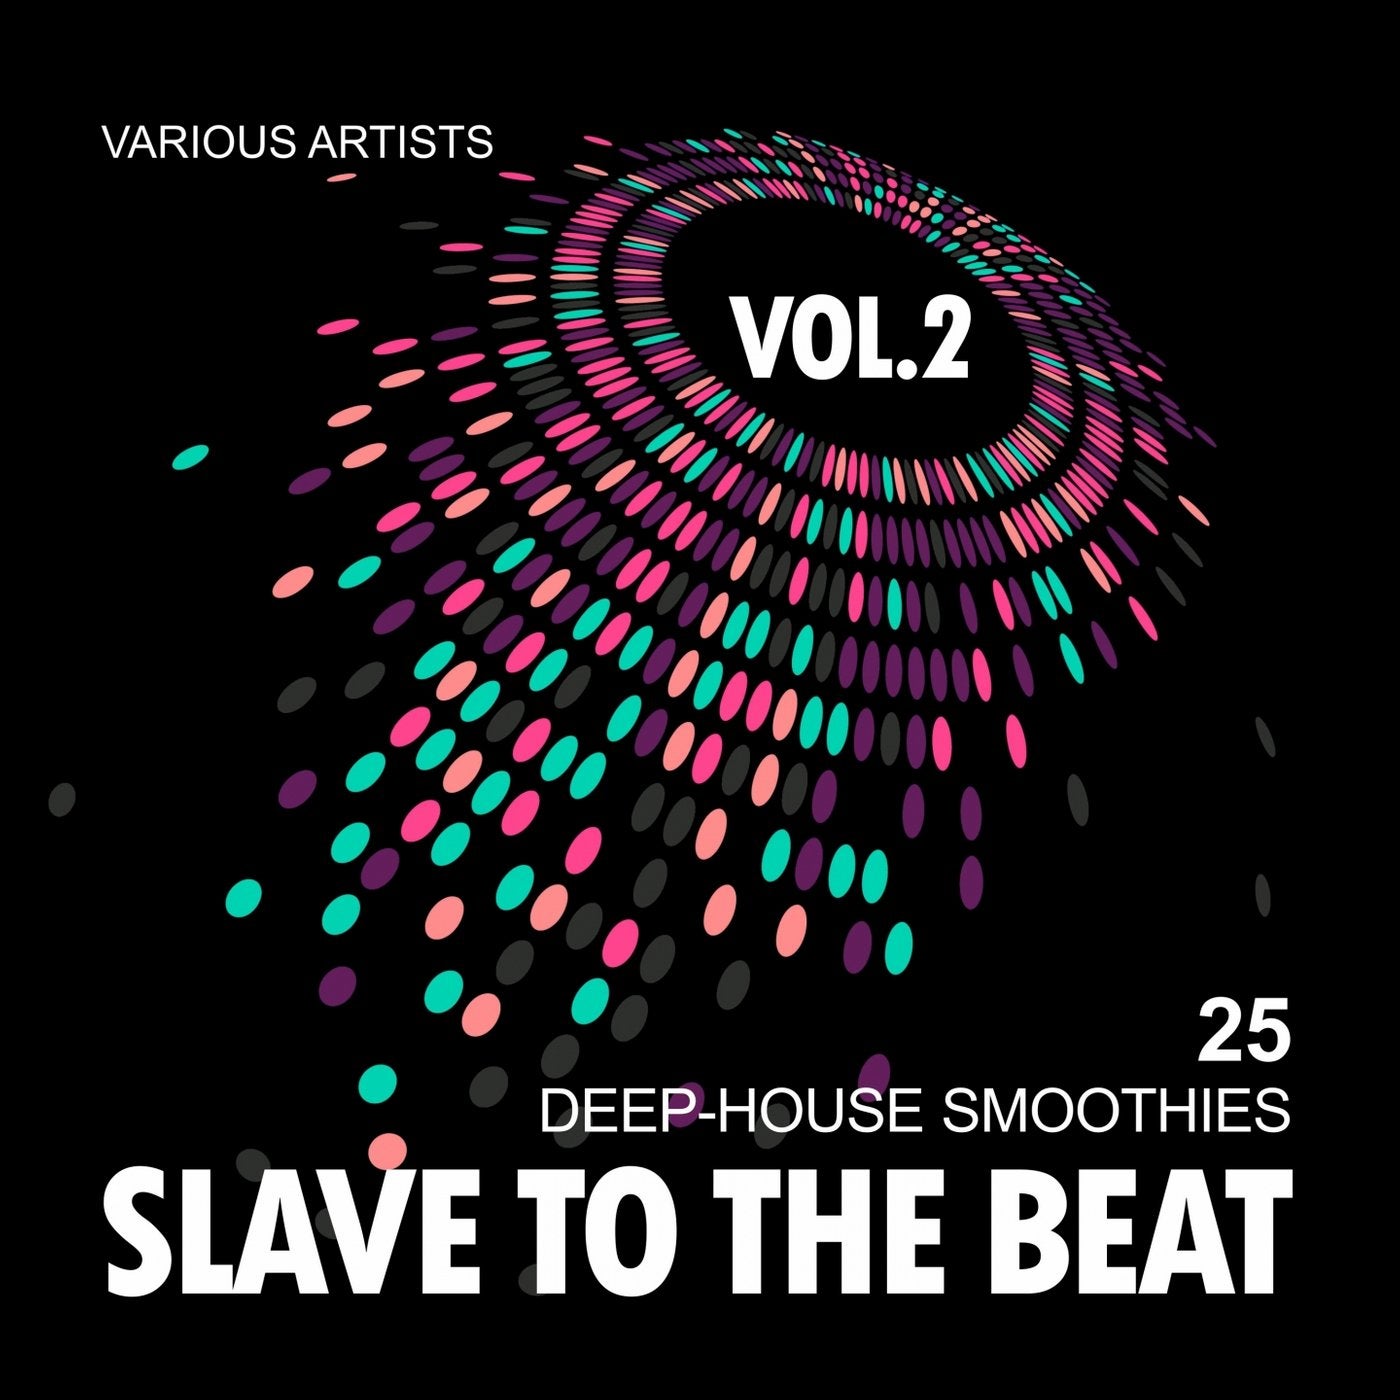 Slave To The Beat (25 Deep-House Smoothies), Vol. 2